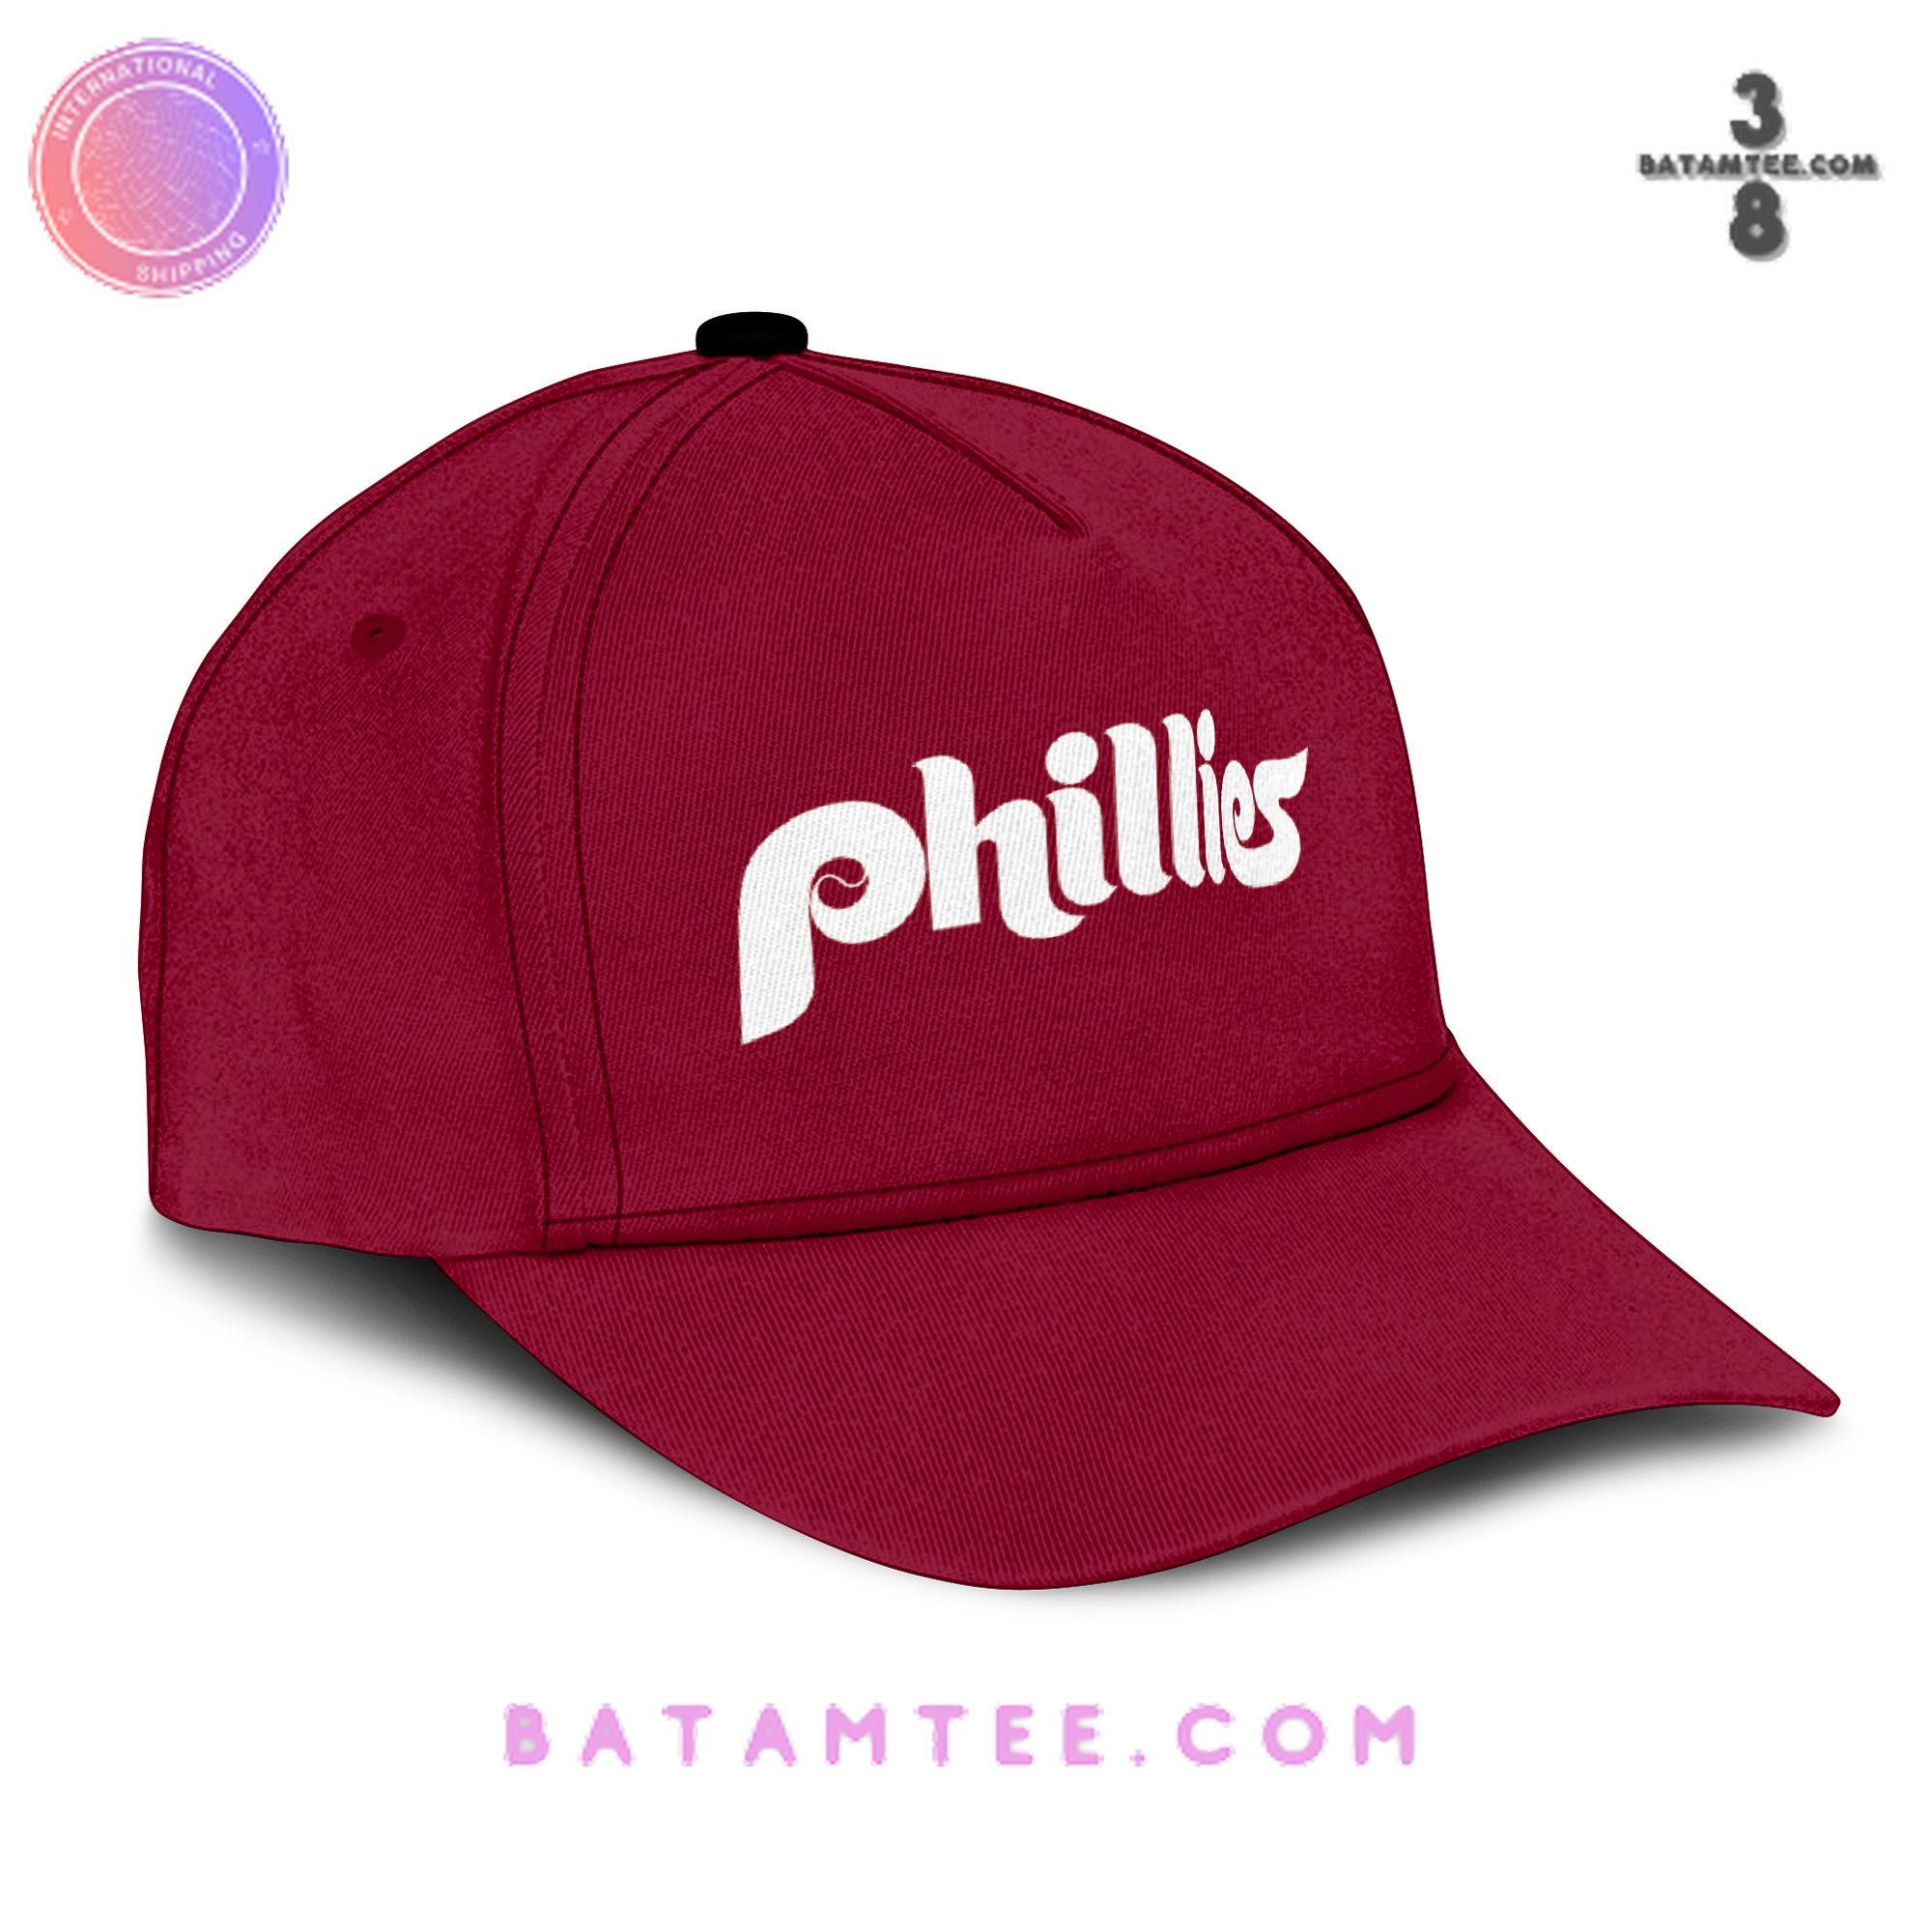 Philadelphia Phillies MLB Red Hoodie, Jogger, Cap's Overview - Batamtee Shop - Threads & Totes: Your Style Destination